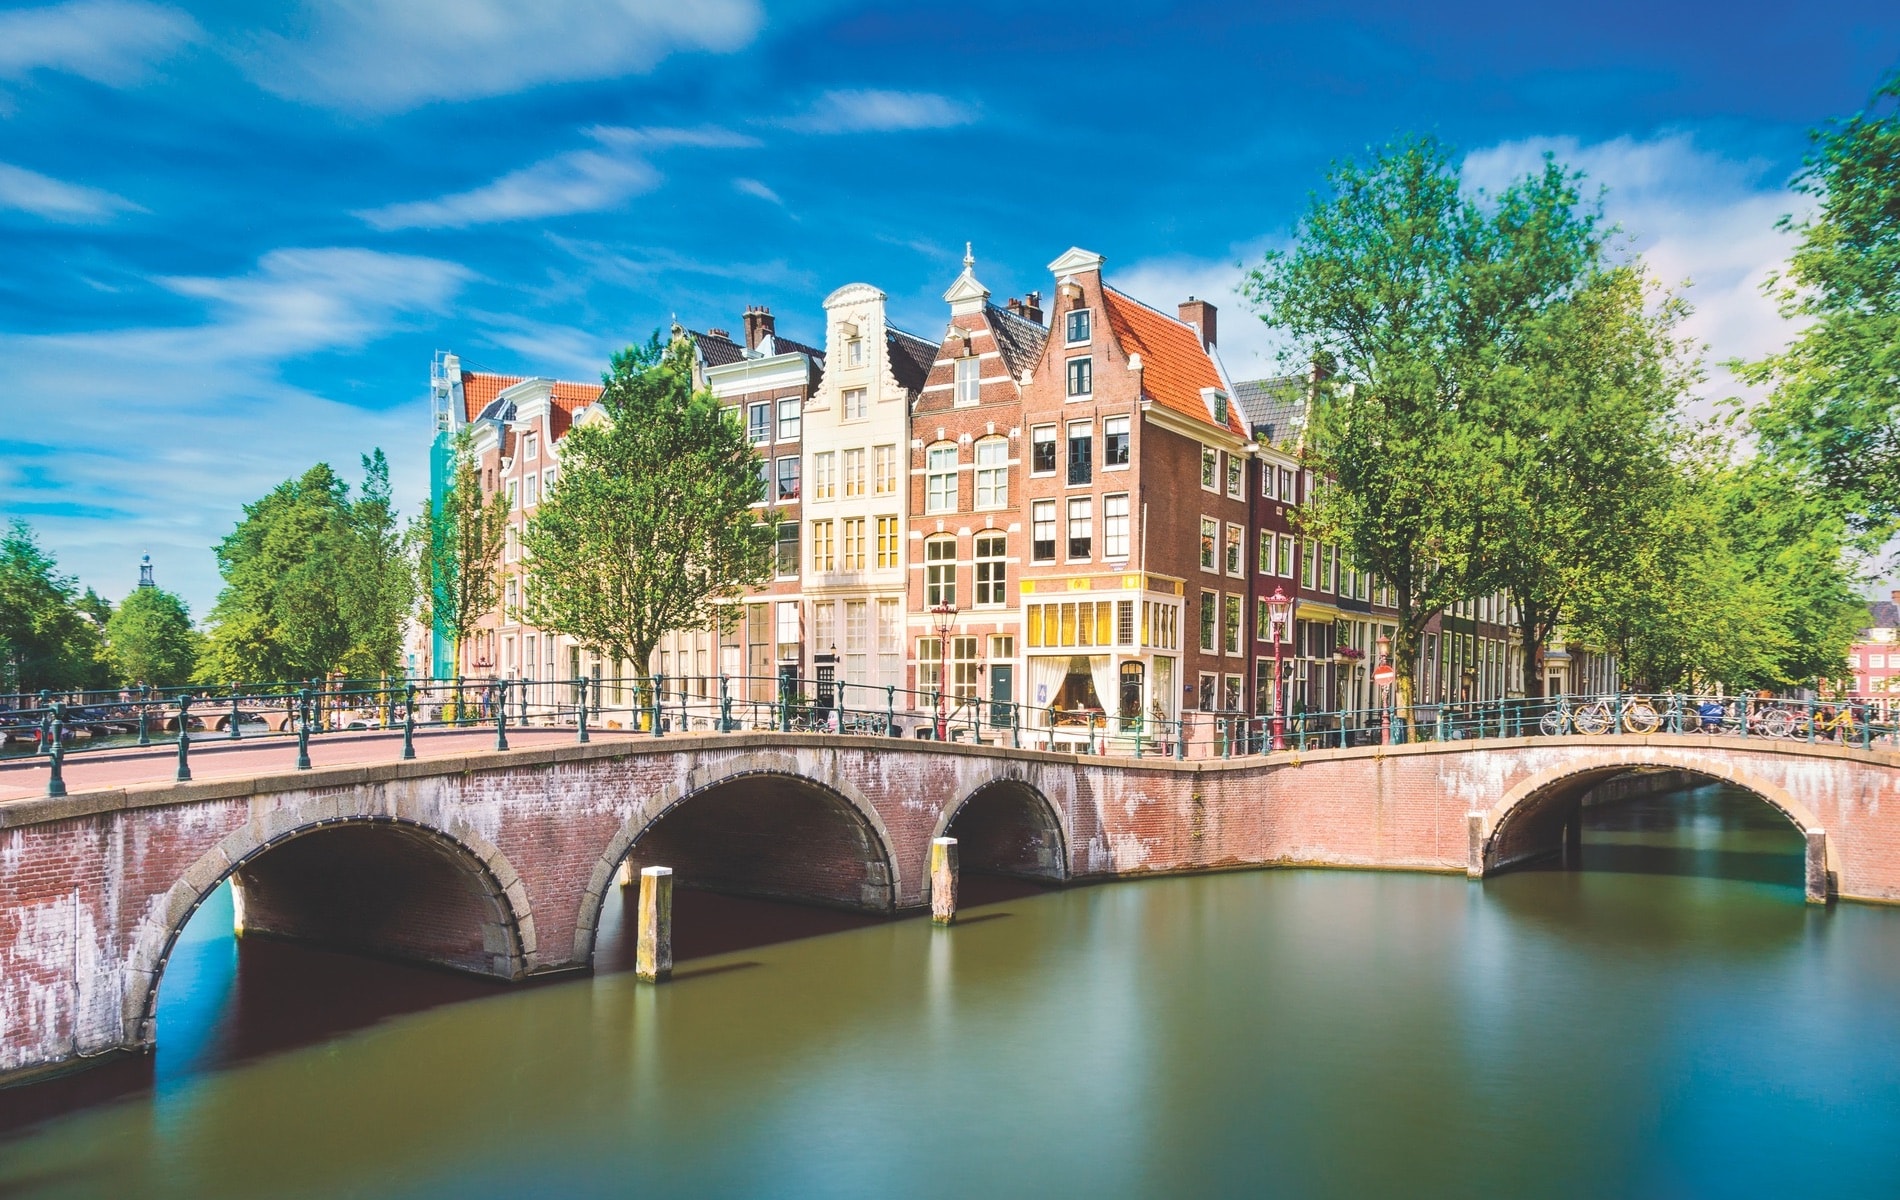 Amsterdam was one of three cities on writer Sarah Freeman’s trip to discover the history of famous Dutch painter Rembrandt van Rijn.